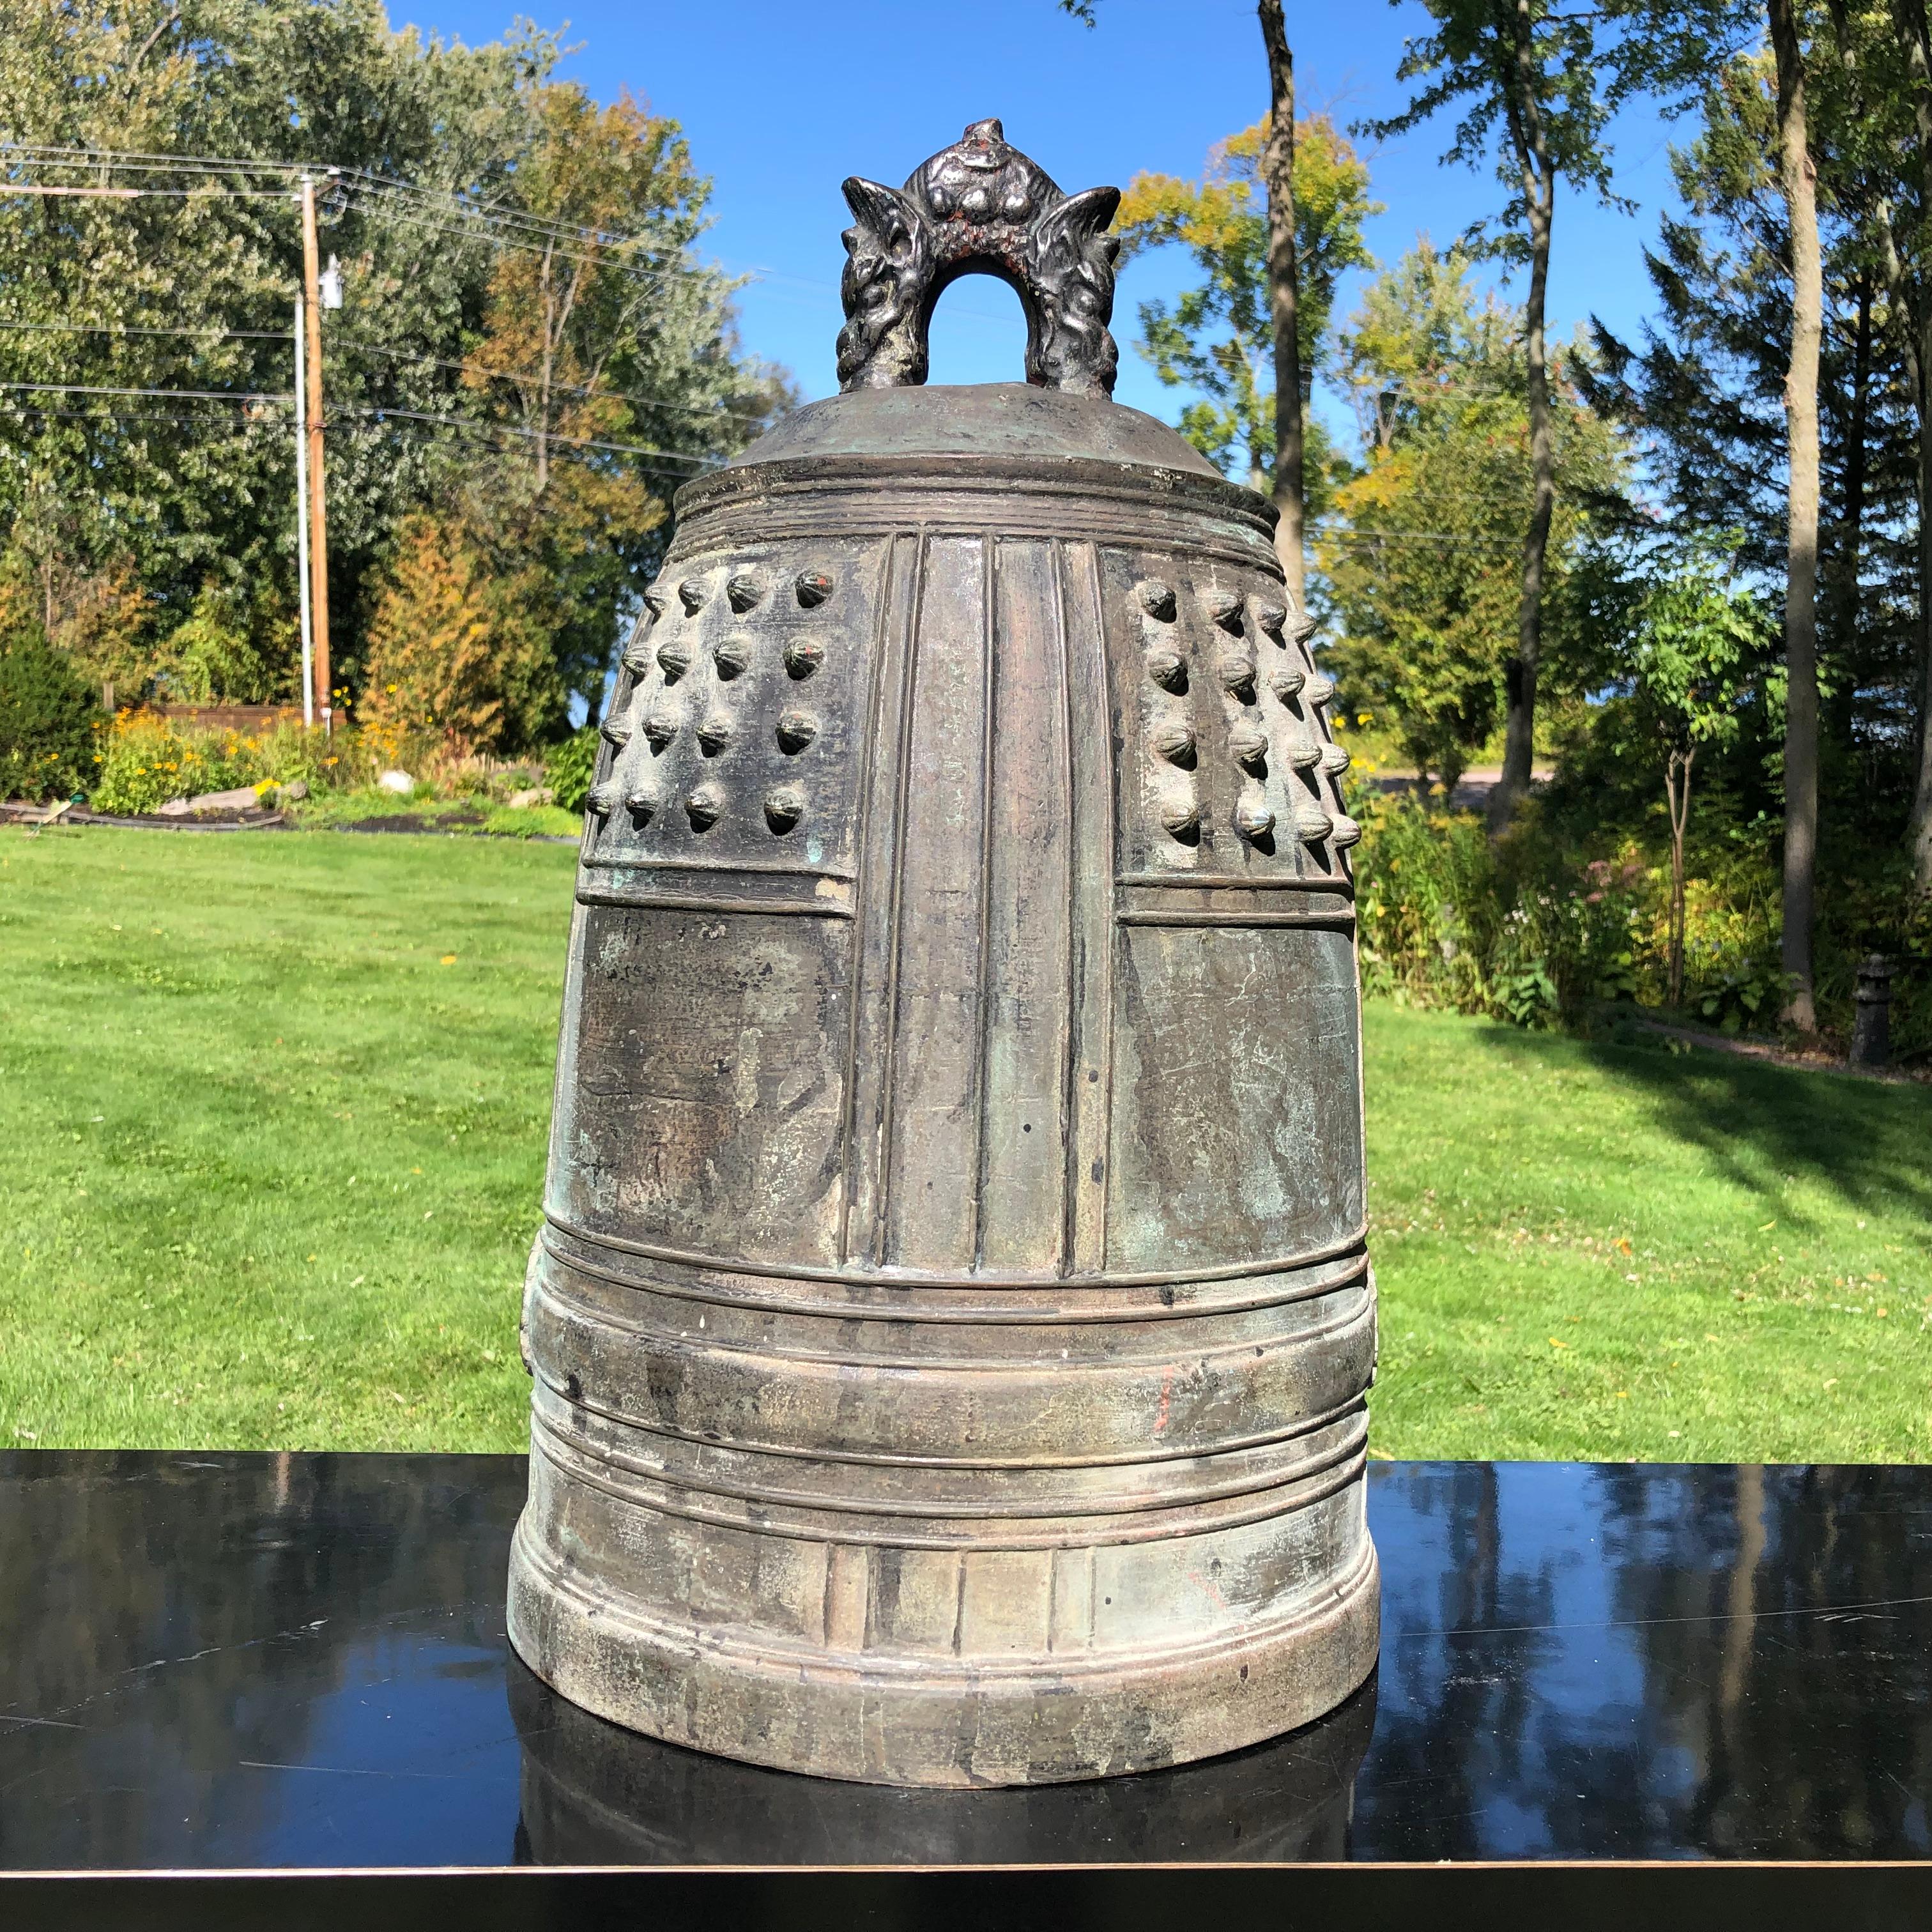 A best find from our recent Japanese Kyoto Travels

Japanese large, substantial antique solid cast bronze temple bell Bonsho with beautiful deep brown and handsome patina from great age. Signed in honor of a caring donor whose family undoubtedly